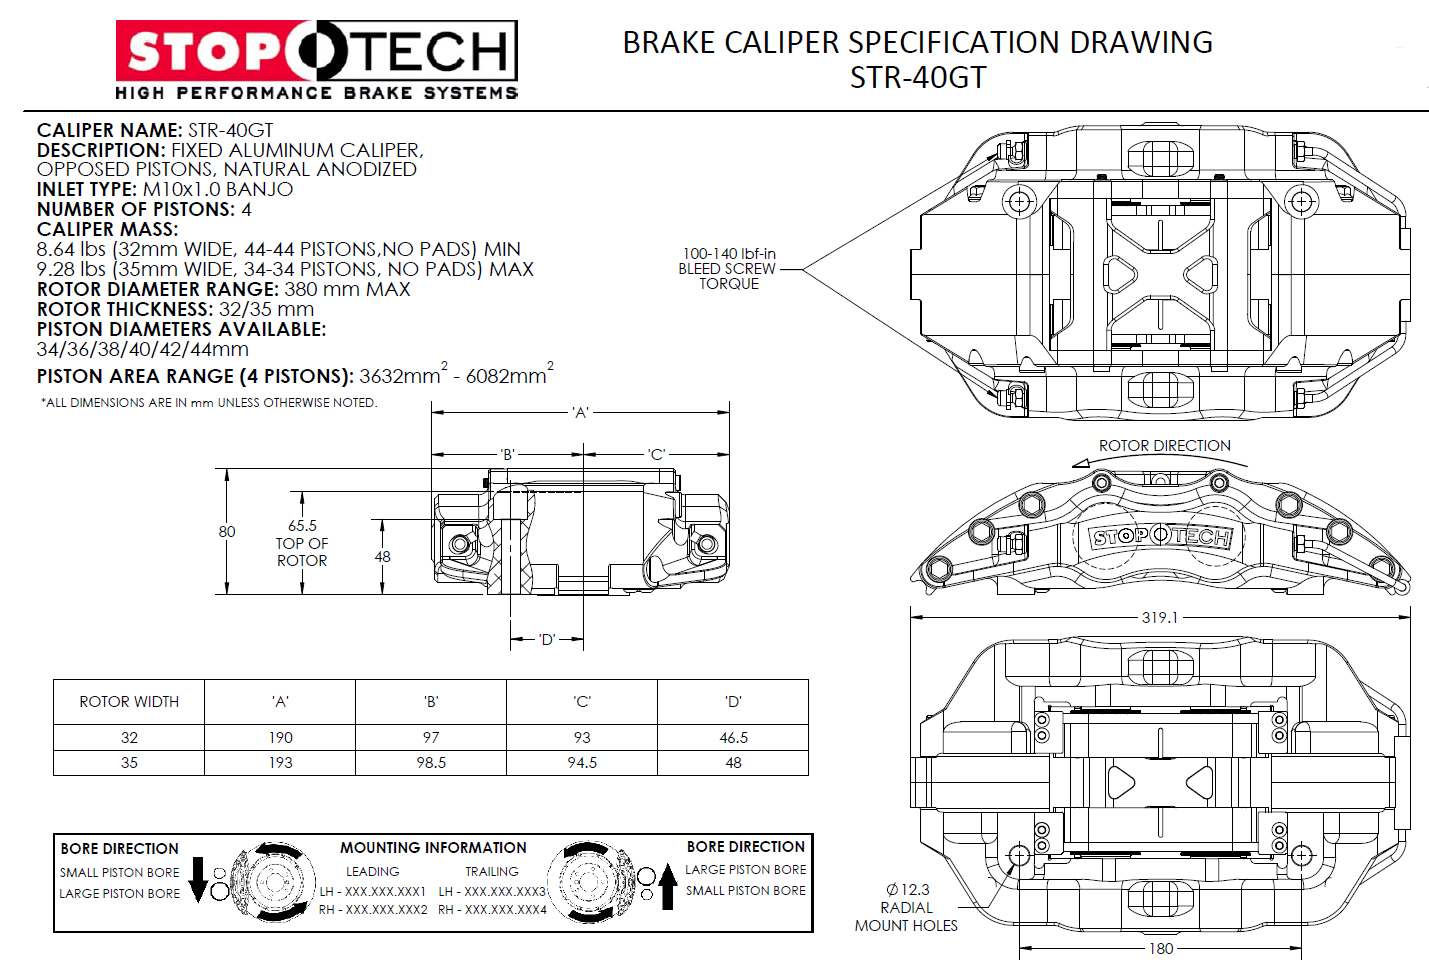 StopTech STR-40GT Caliper Specifications